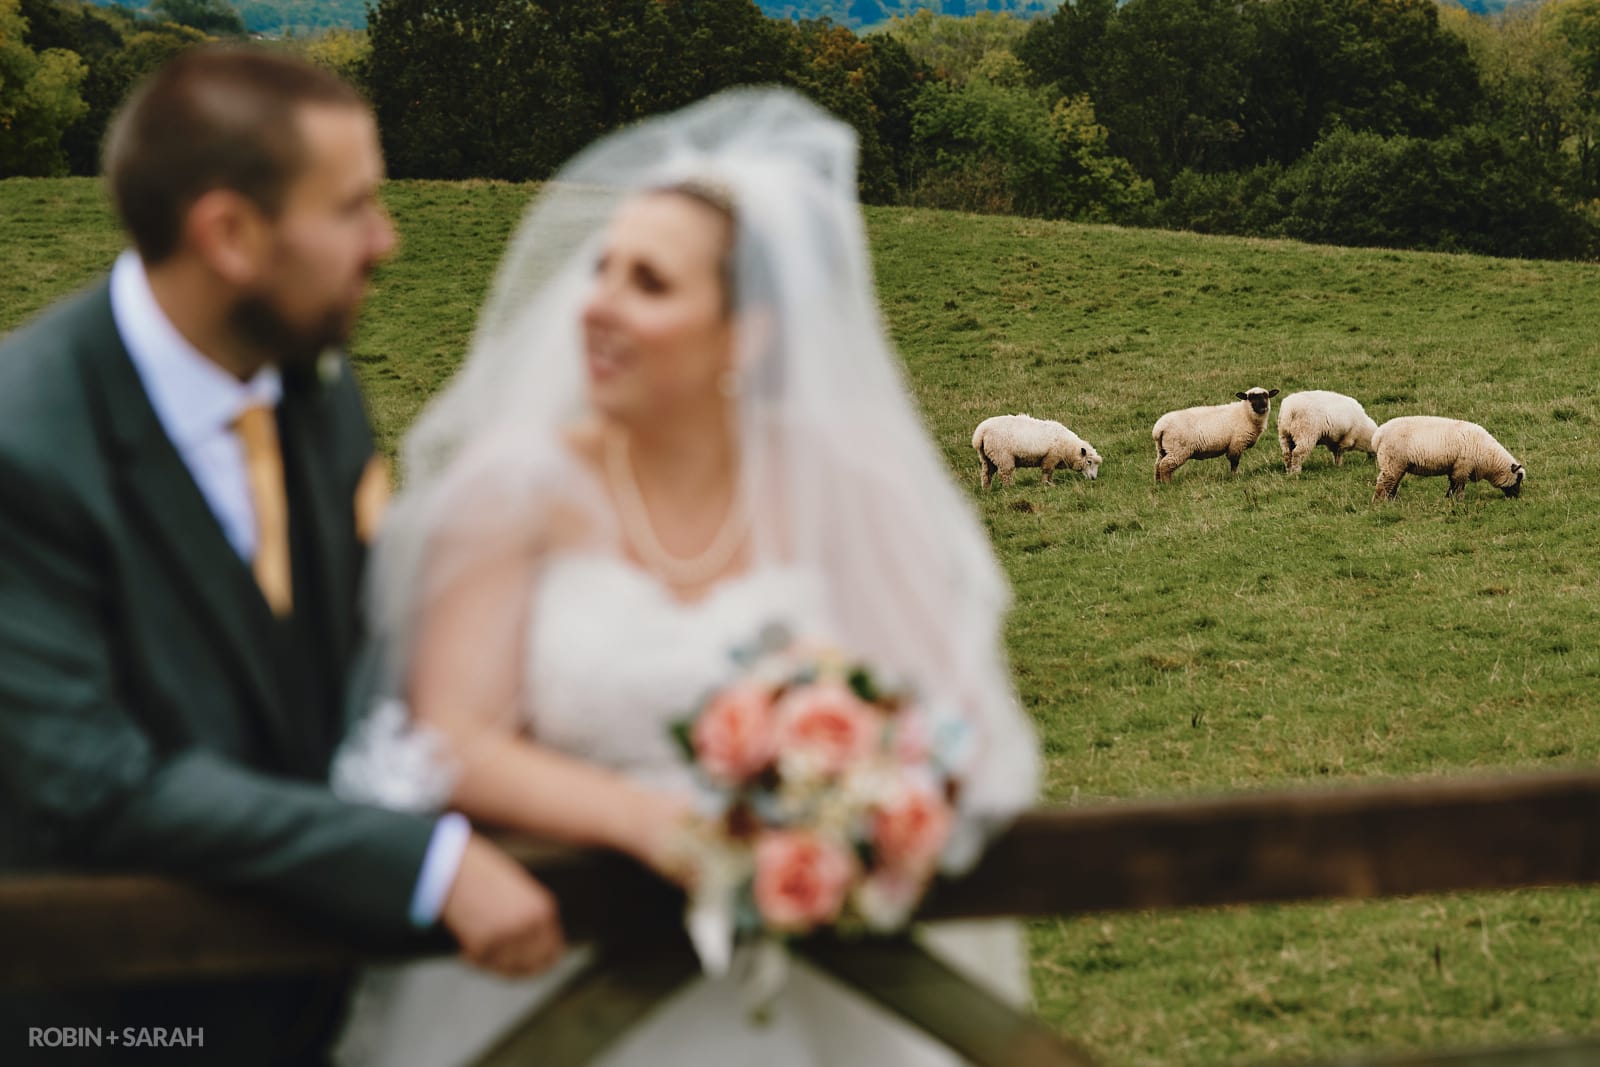 Sheep in a field watch bride and groom